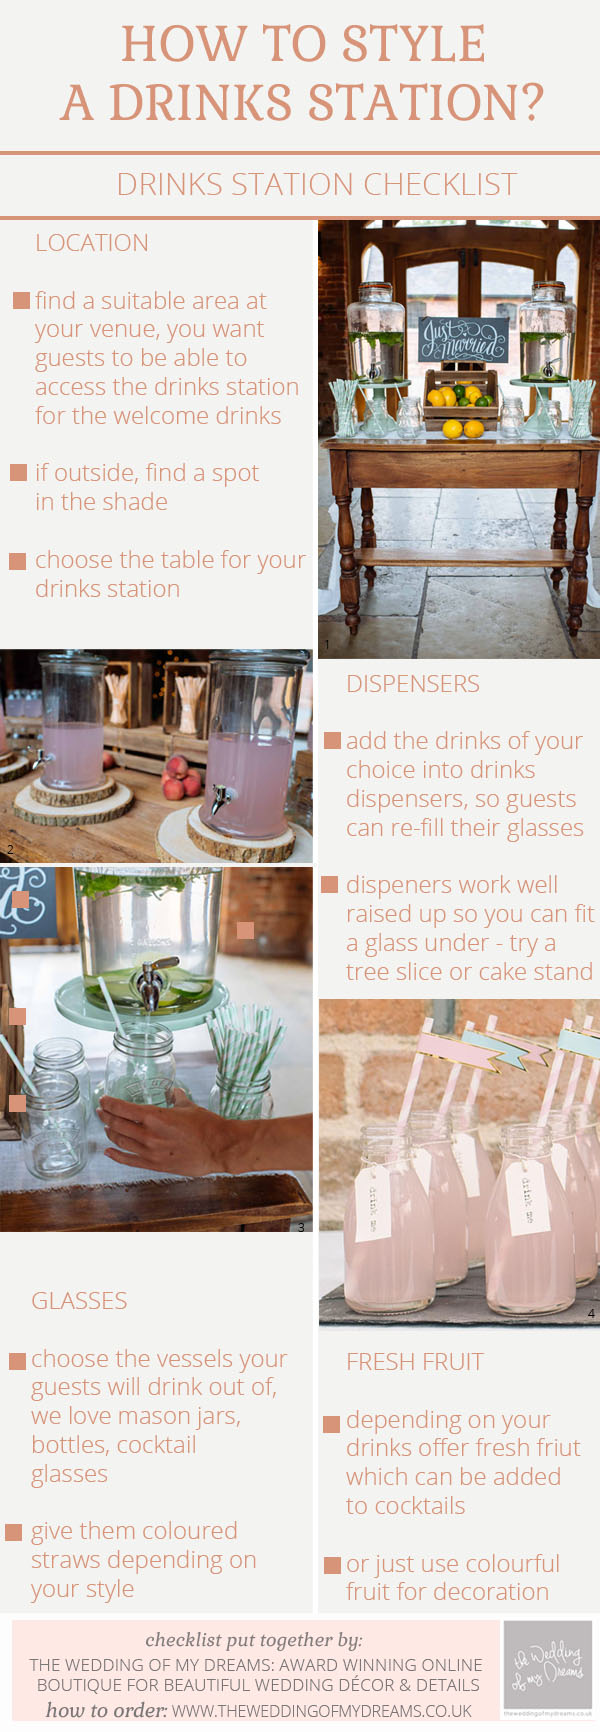 http://blog.theweddingofmydreams.co.uk/wp-content/uploads/2016/05/what-do-I-need-for-a-drinks-station-checklist-how-to-style-a-drinks-station.jpg